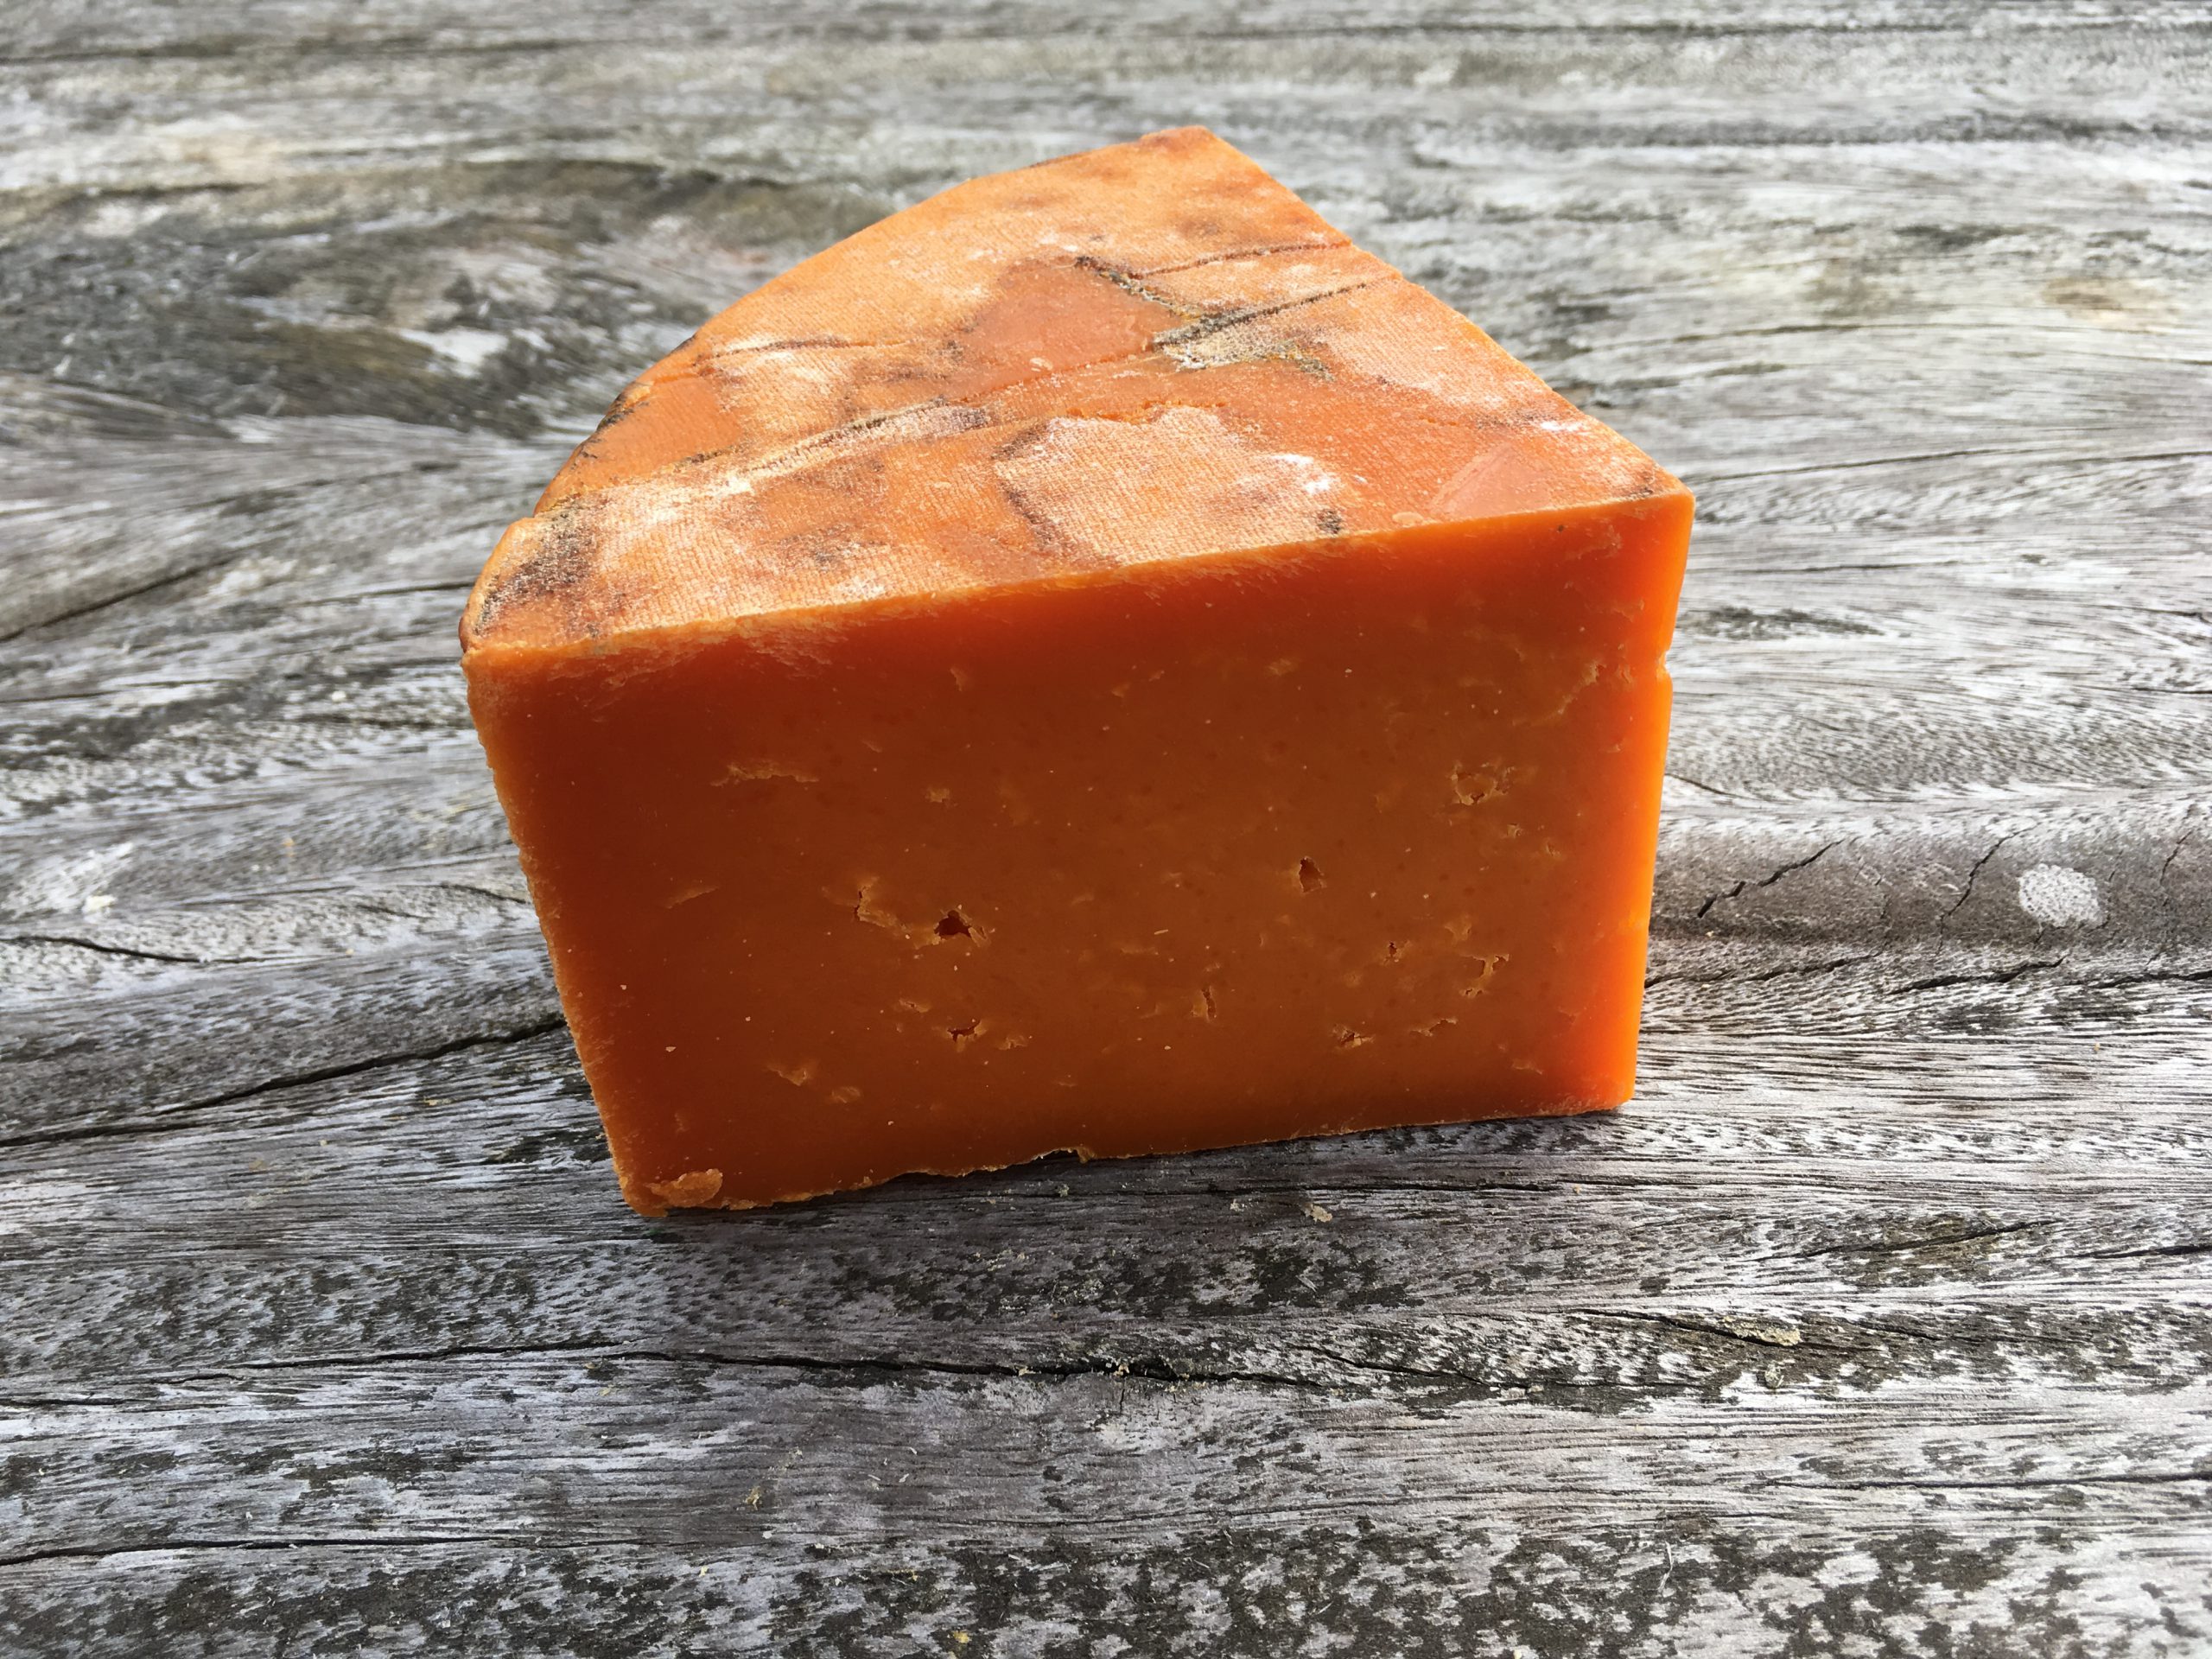 Rutland Red (Mature Red Leicester)